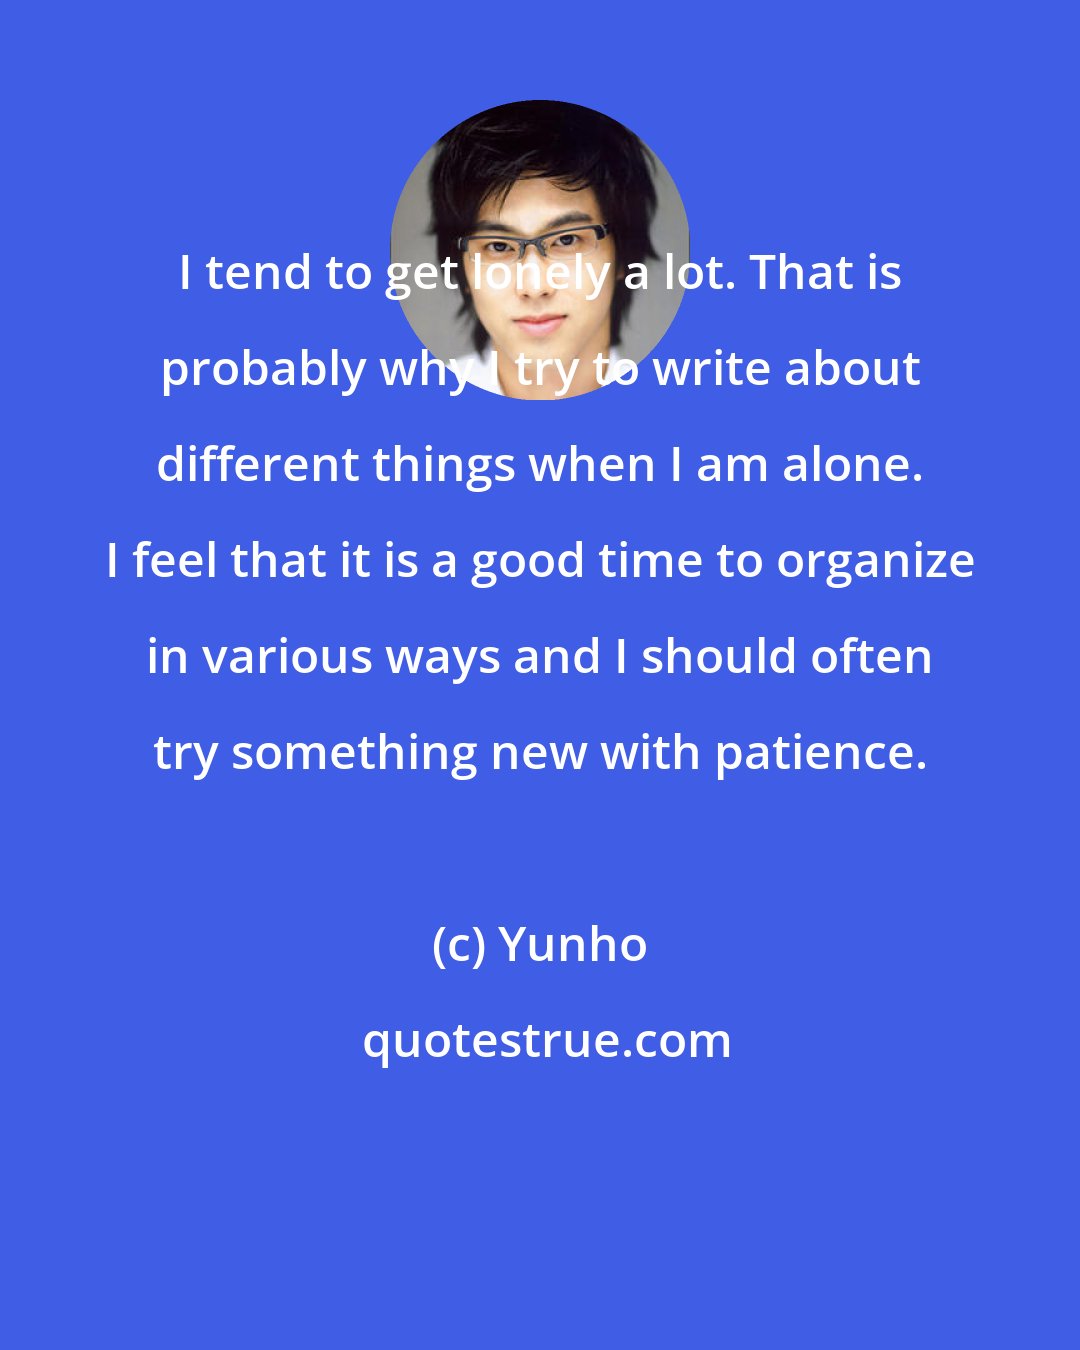 Yunho: I tend to get lonely a lot. That is probably why I try to write about different things when I am alone. I feel that it is a good time to organize in various ways and I should often try something new with patience.